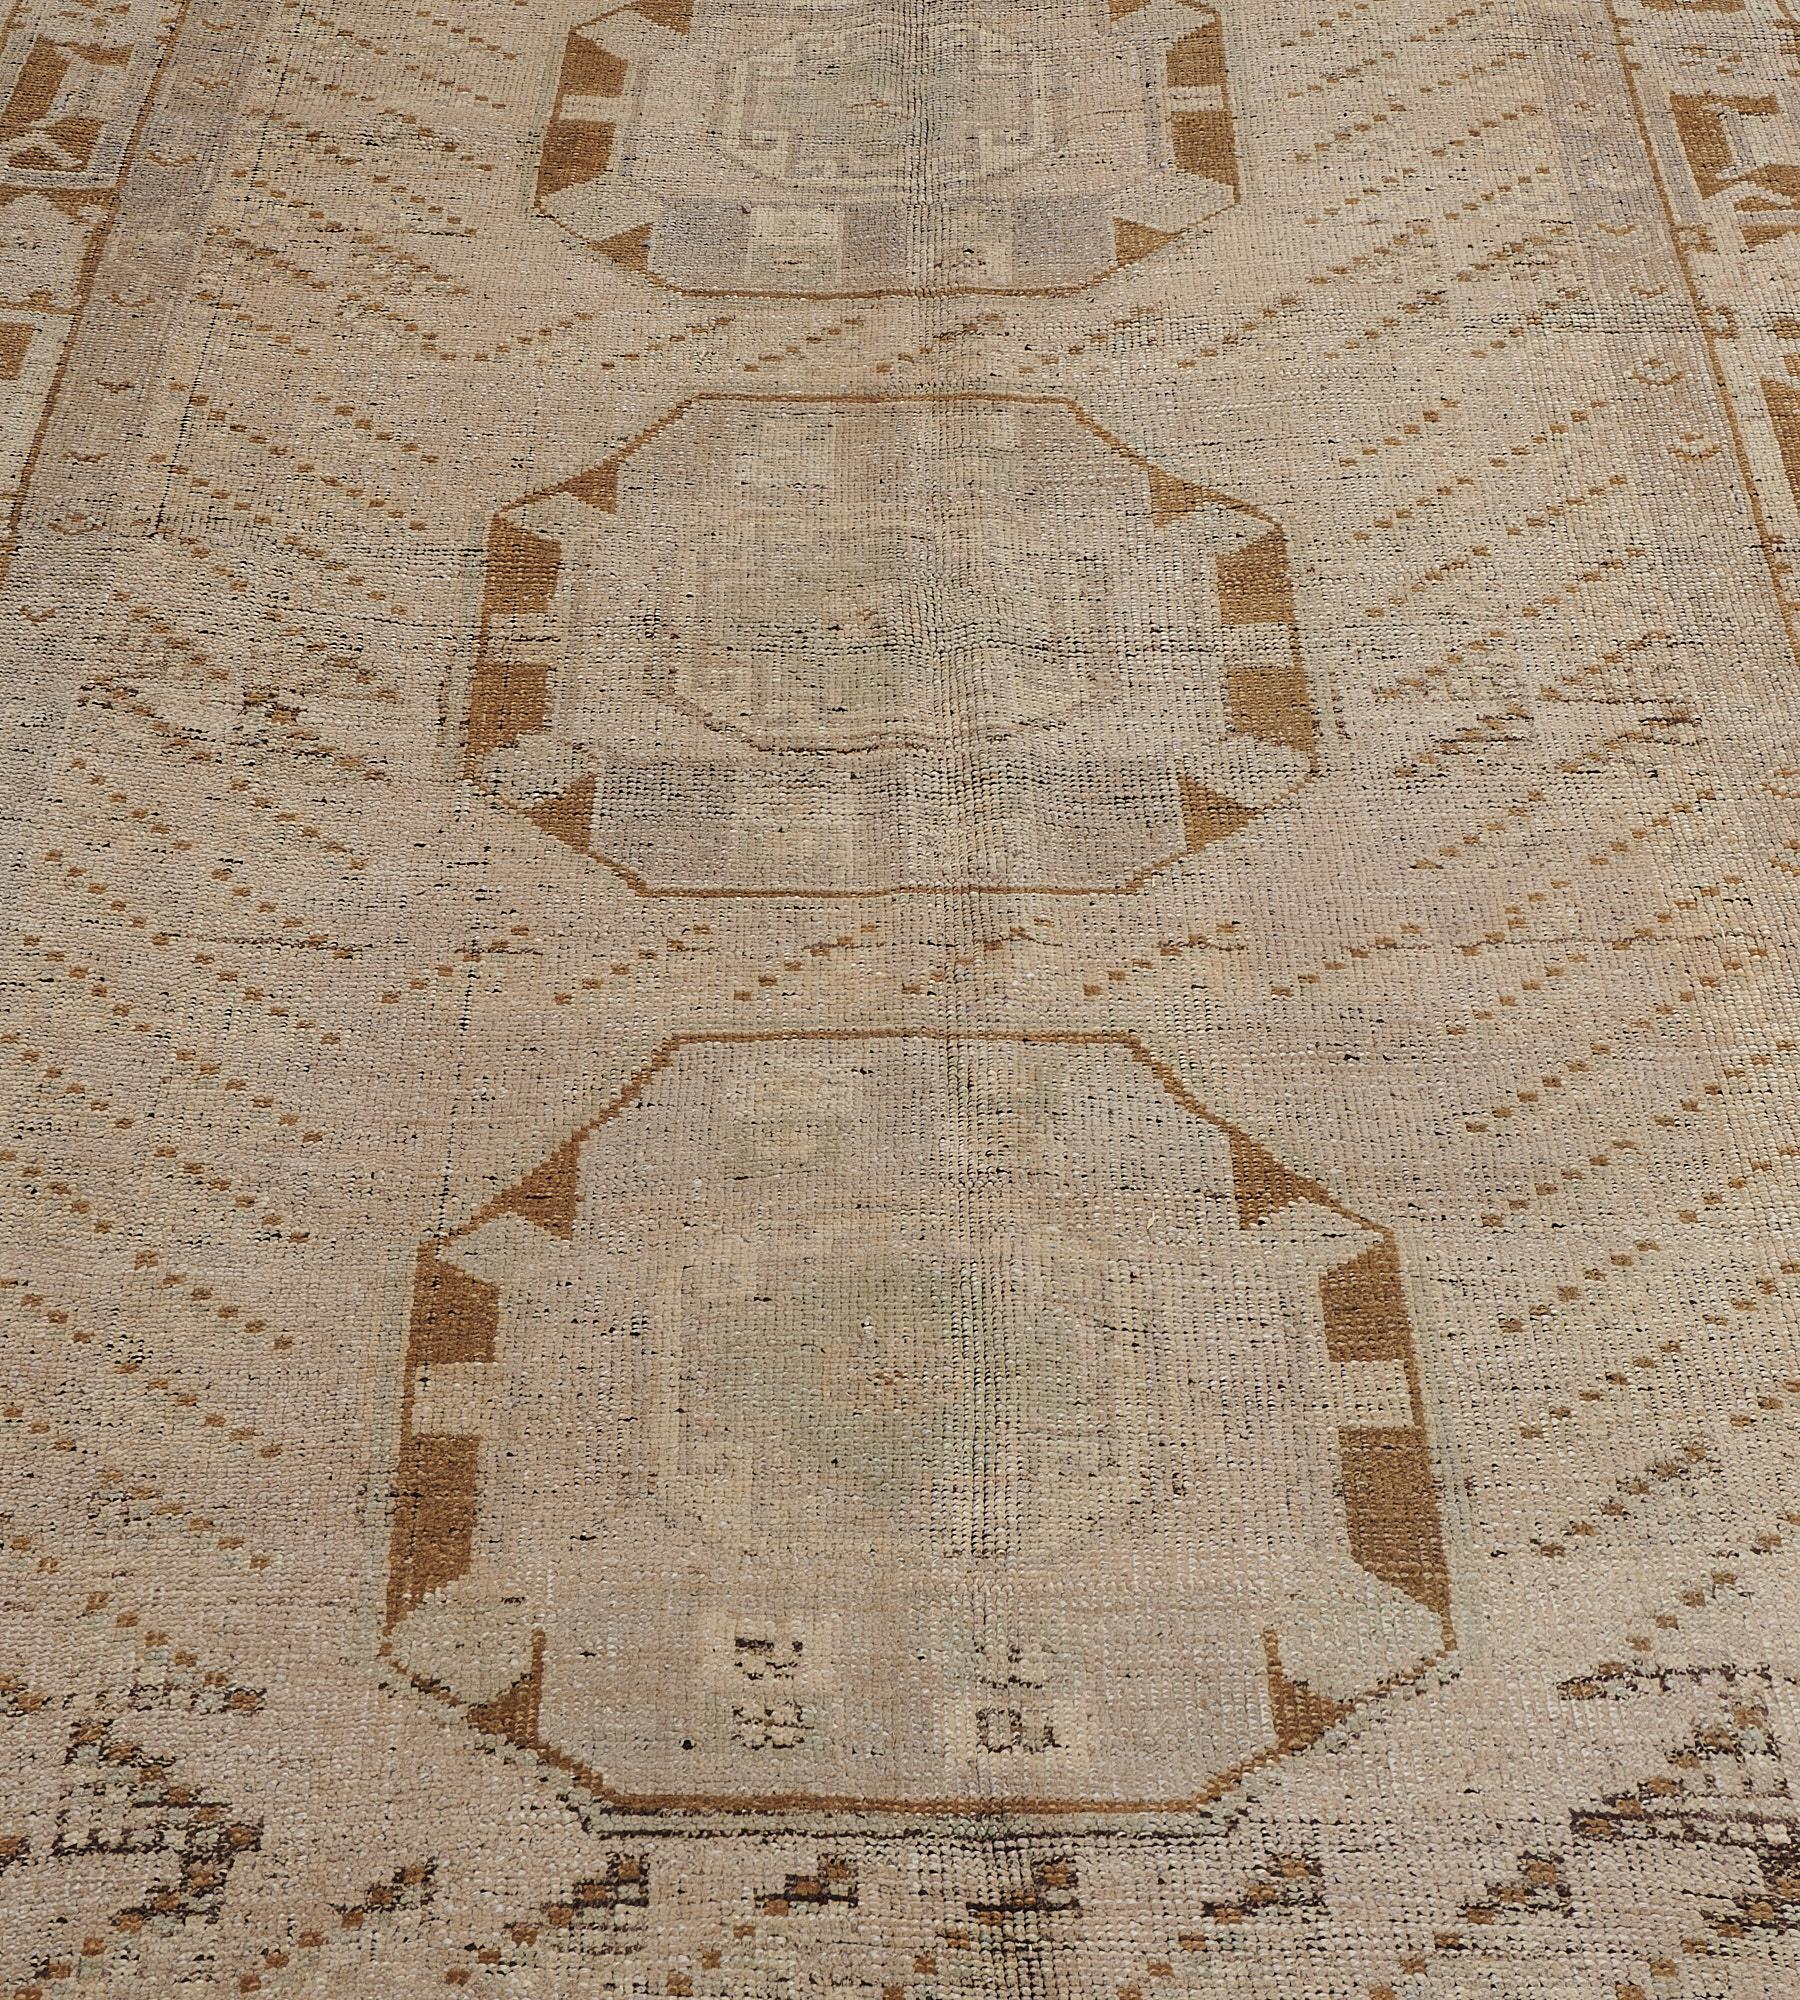 Vintage Handwoven Geometric Turkish Anatolian Rug In Good Condition For Sale In West Hollywood, CA